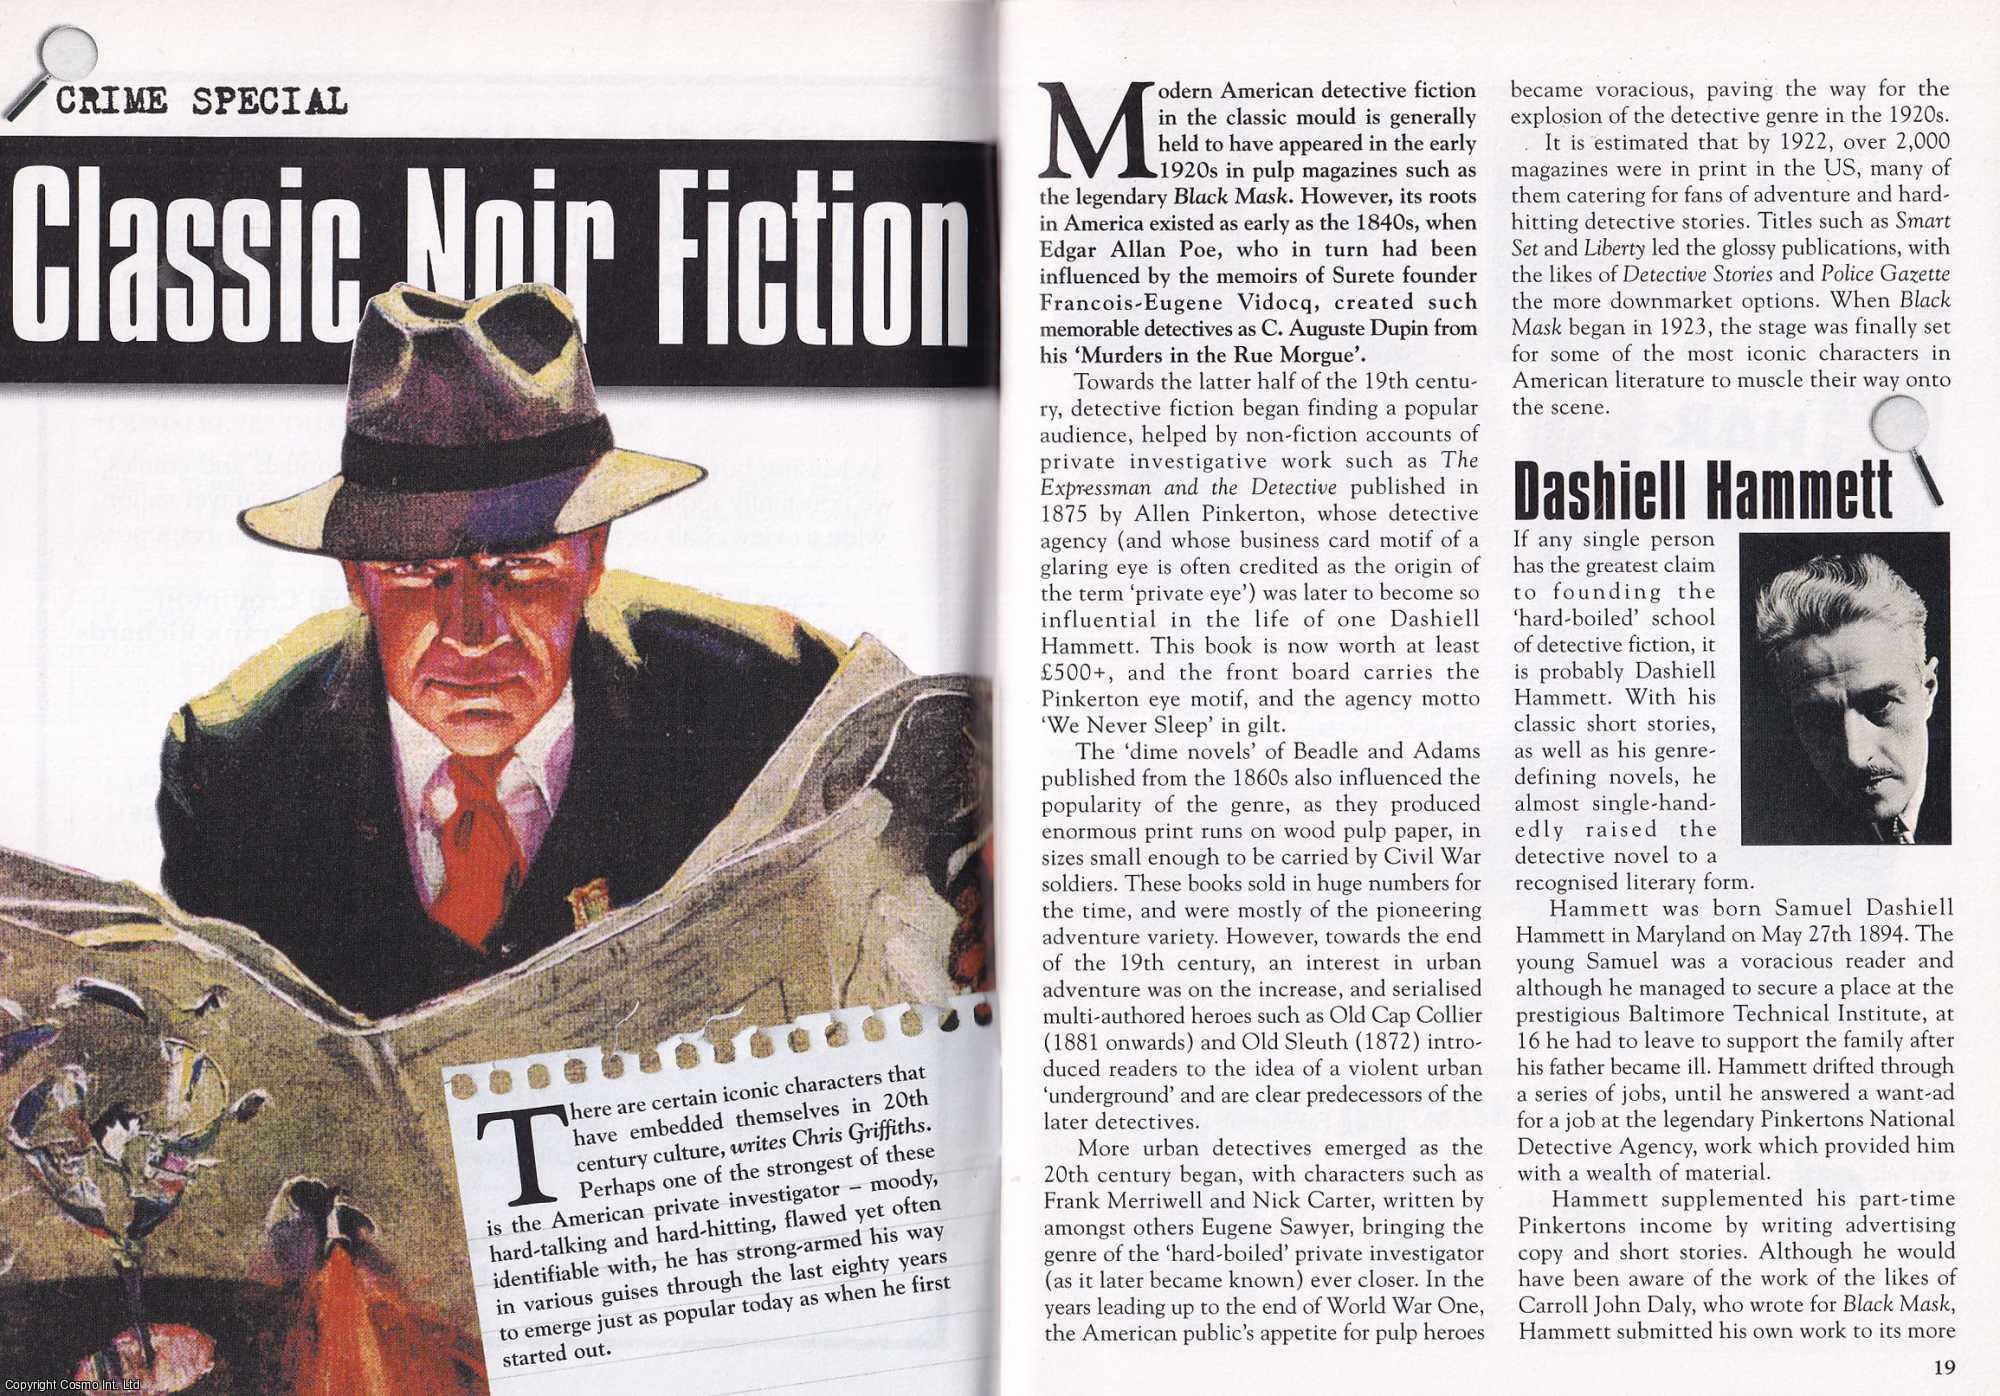 Chris Griffiths - Classic Noir Fiction. This is an original article separated from an issue of The Book & Magazine Collector publication, 2005.